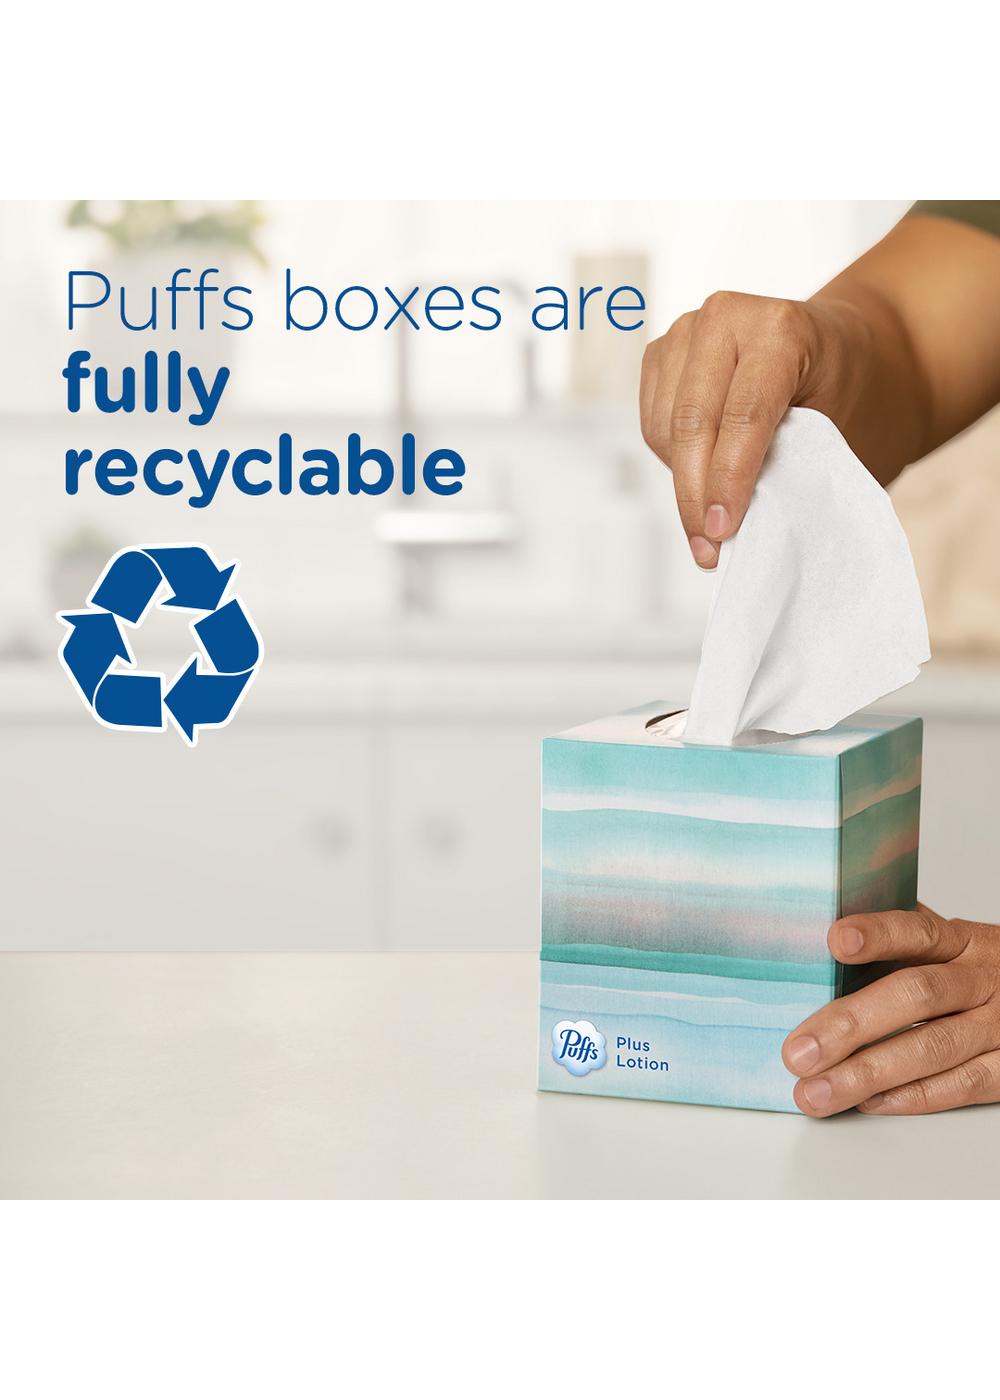 Puffs Ultra Soft Facial Tissues; image 5 of 10